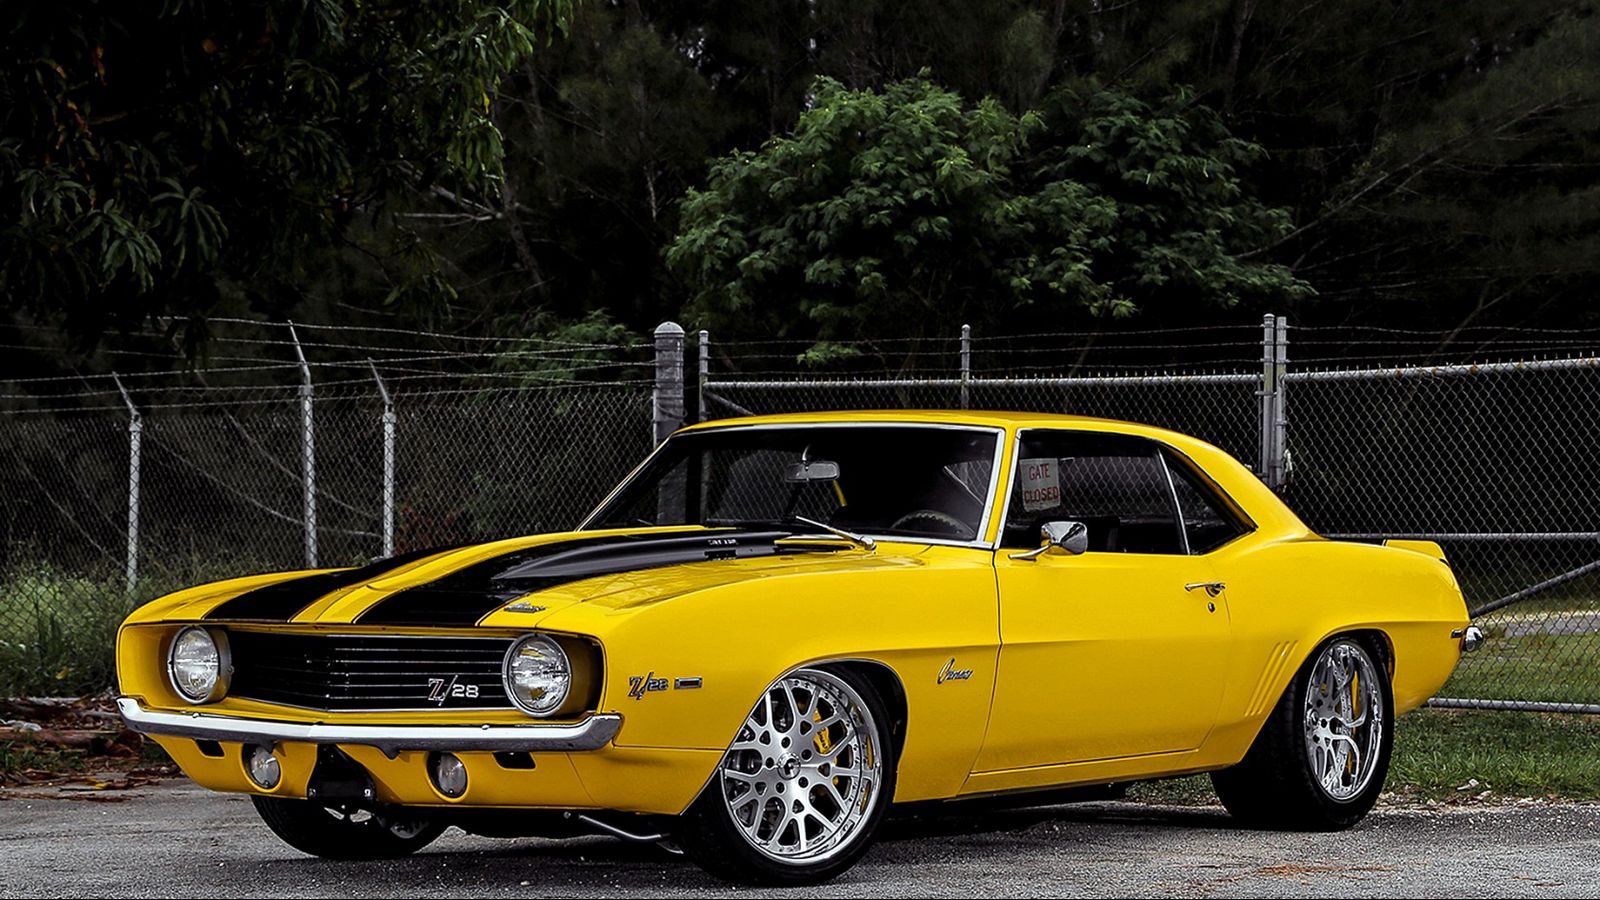 Download wallpaper 1600x900 chevrolet, camaro, 1969, yellow, side view  widescreen 16:9 hd background